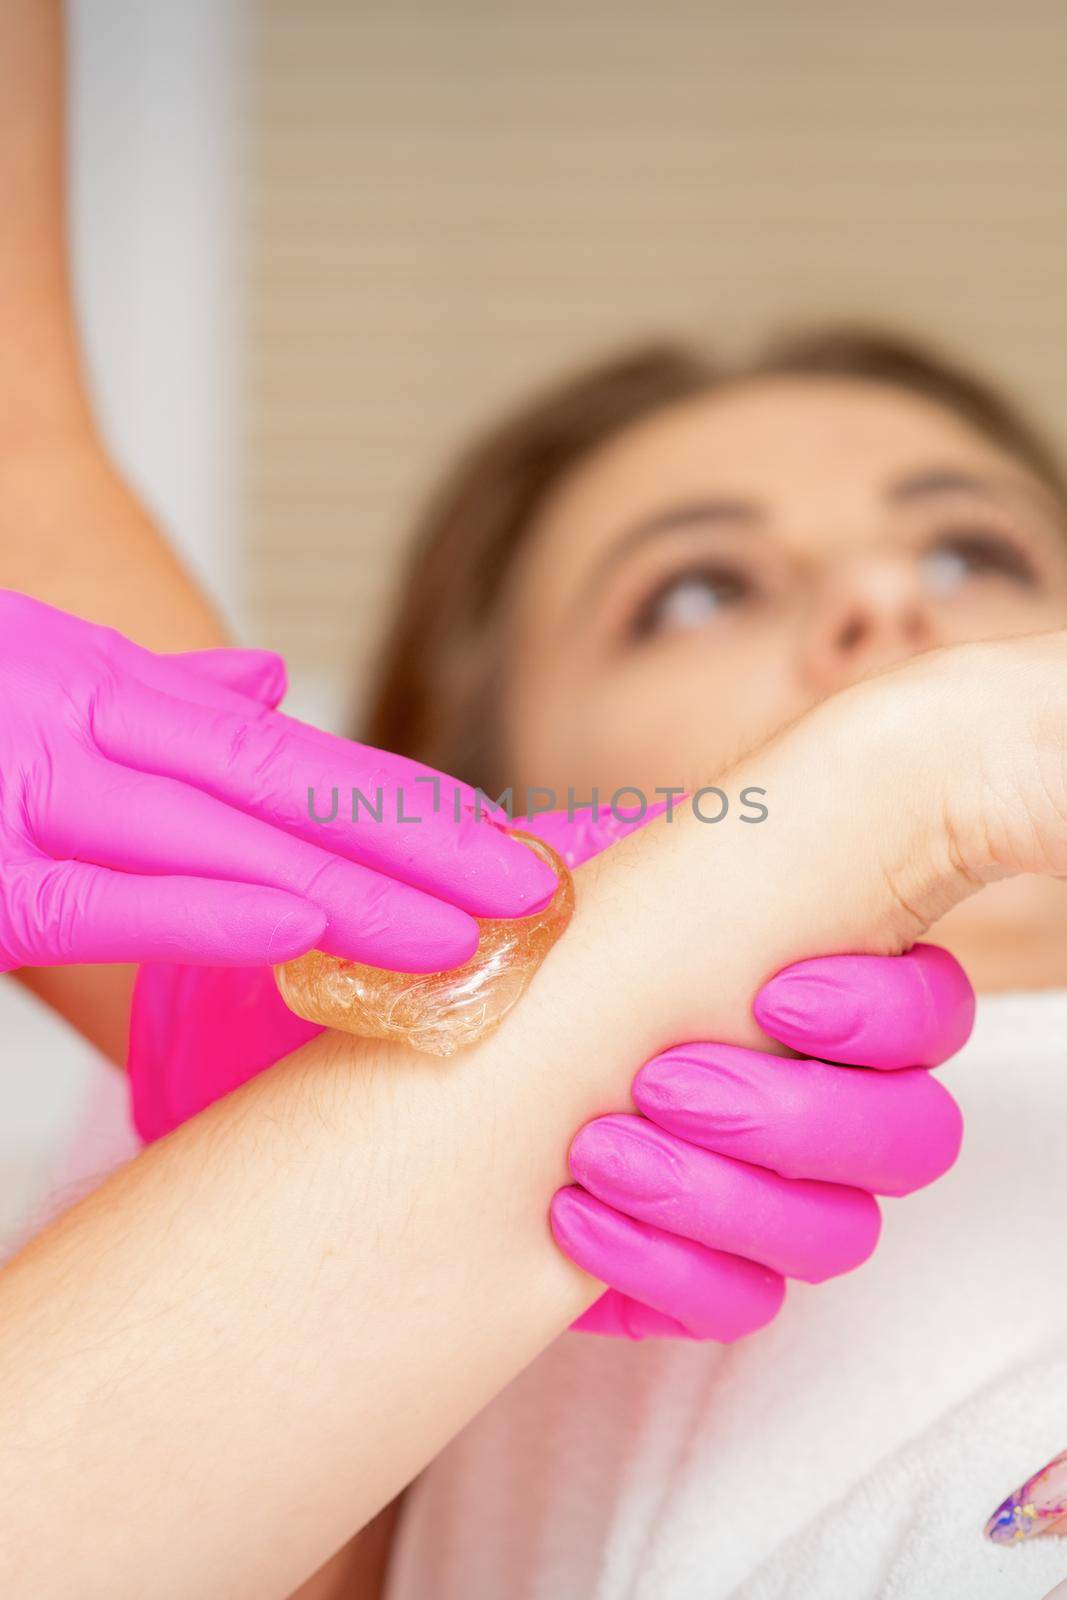 Waxing. Depilation hand and arm of the young woman lying in the spa salon